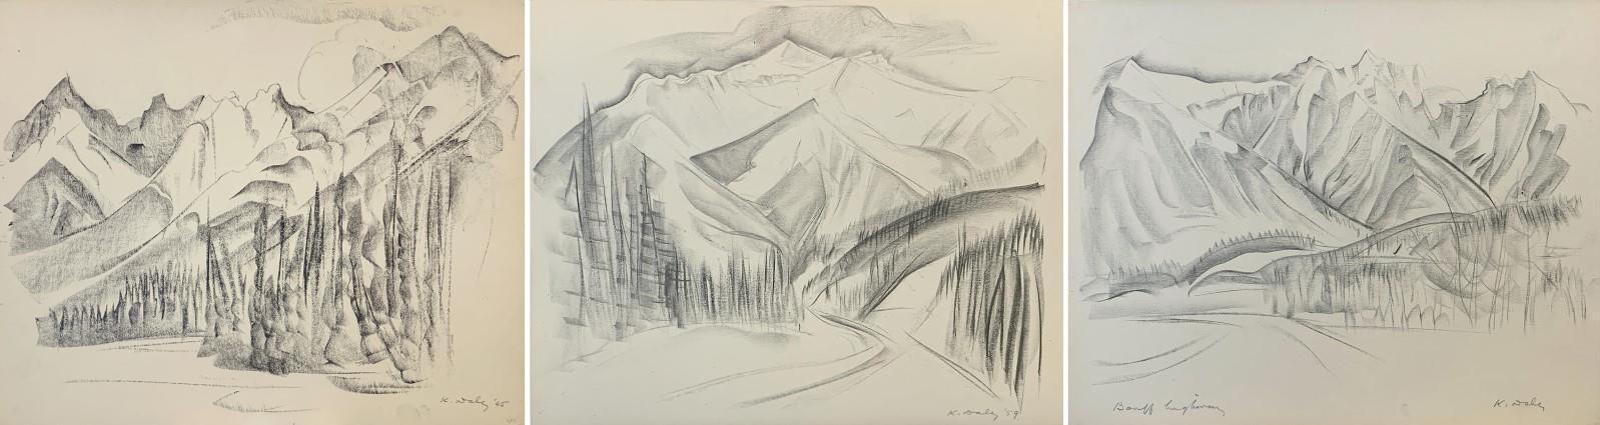 Kathleen Frances Daly Pepper (1898-1994) - Sawback Ridge & The Bow, Near Canmore; 1944/1945